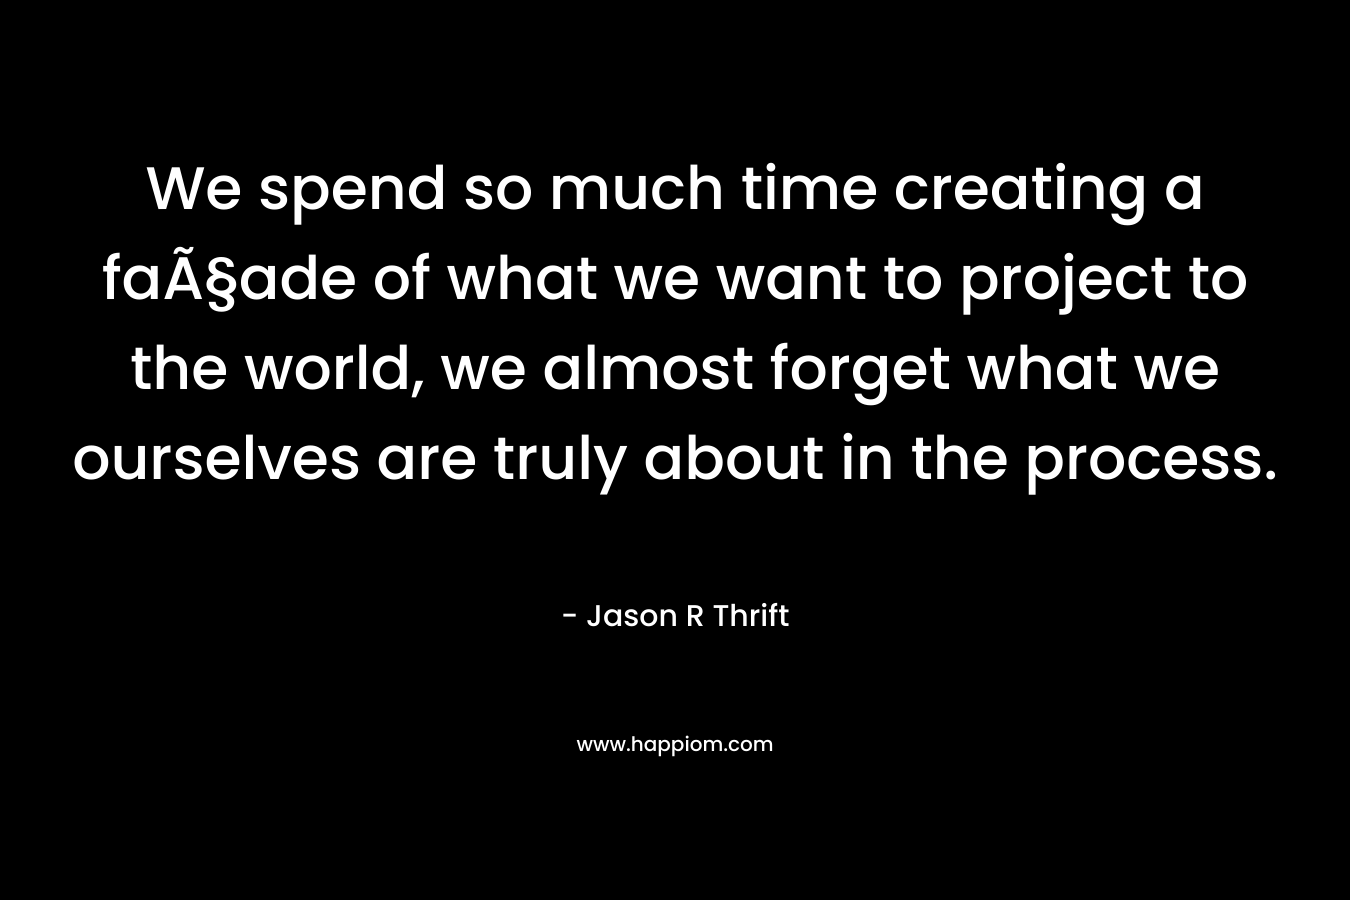 We spend so much time creating a faÃ§ade of what we want to project to the world, we almost forget what we ourselves are truly about in the process. – Jason R Thrift